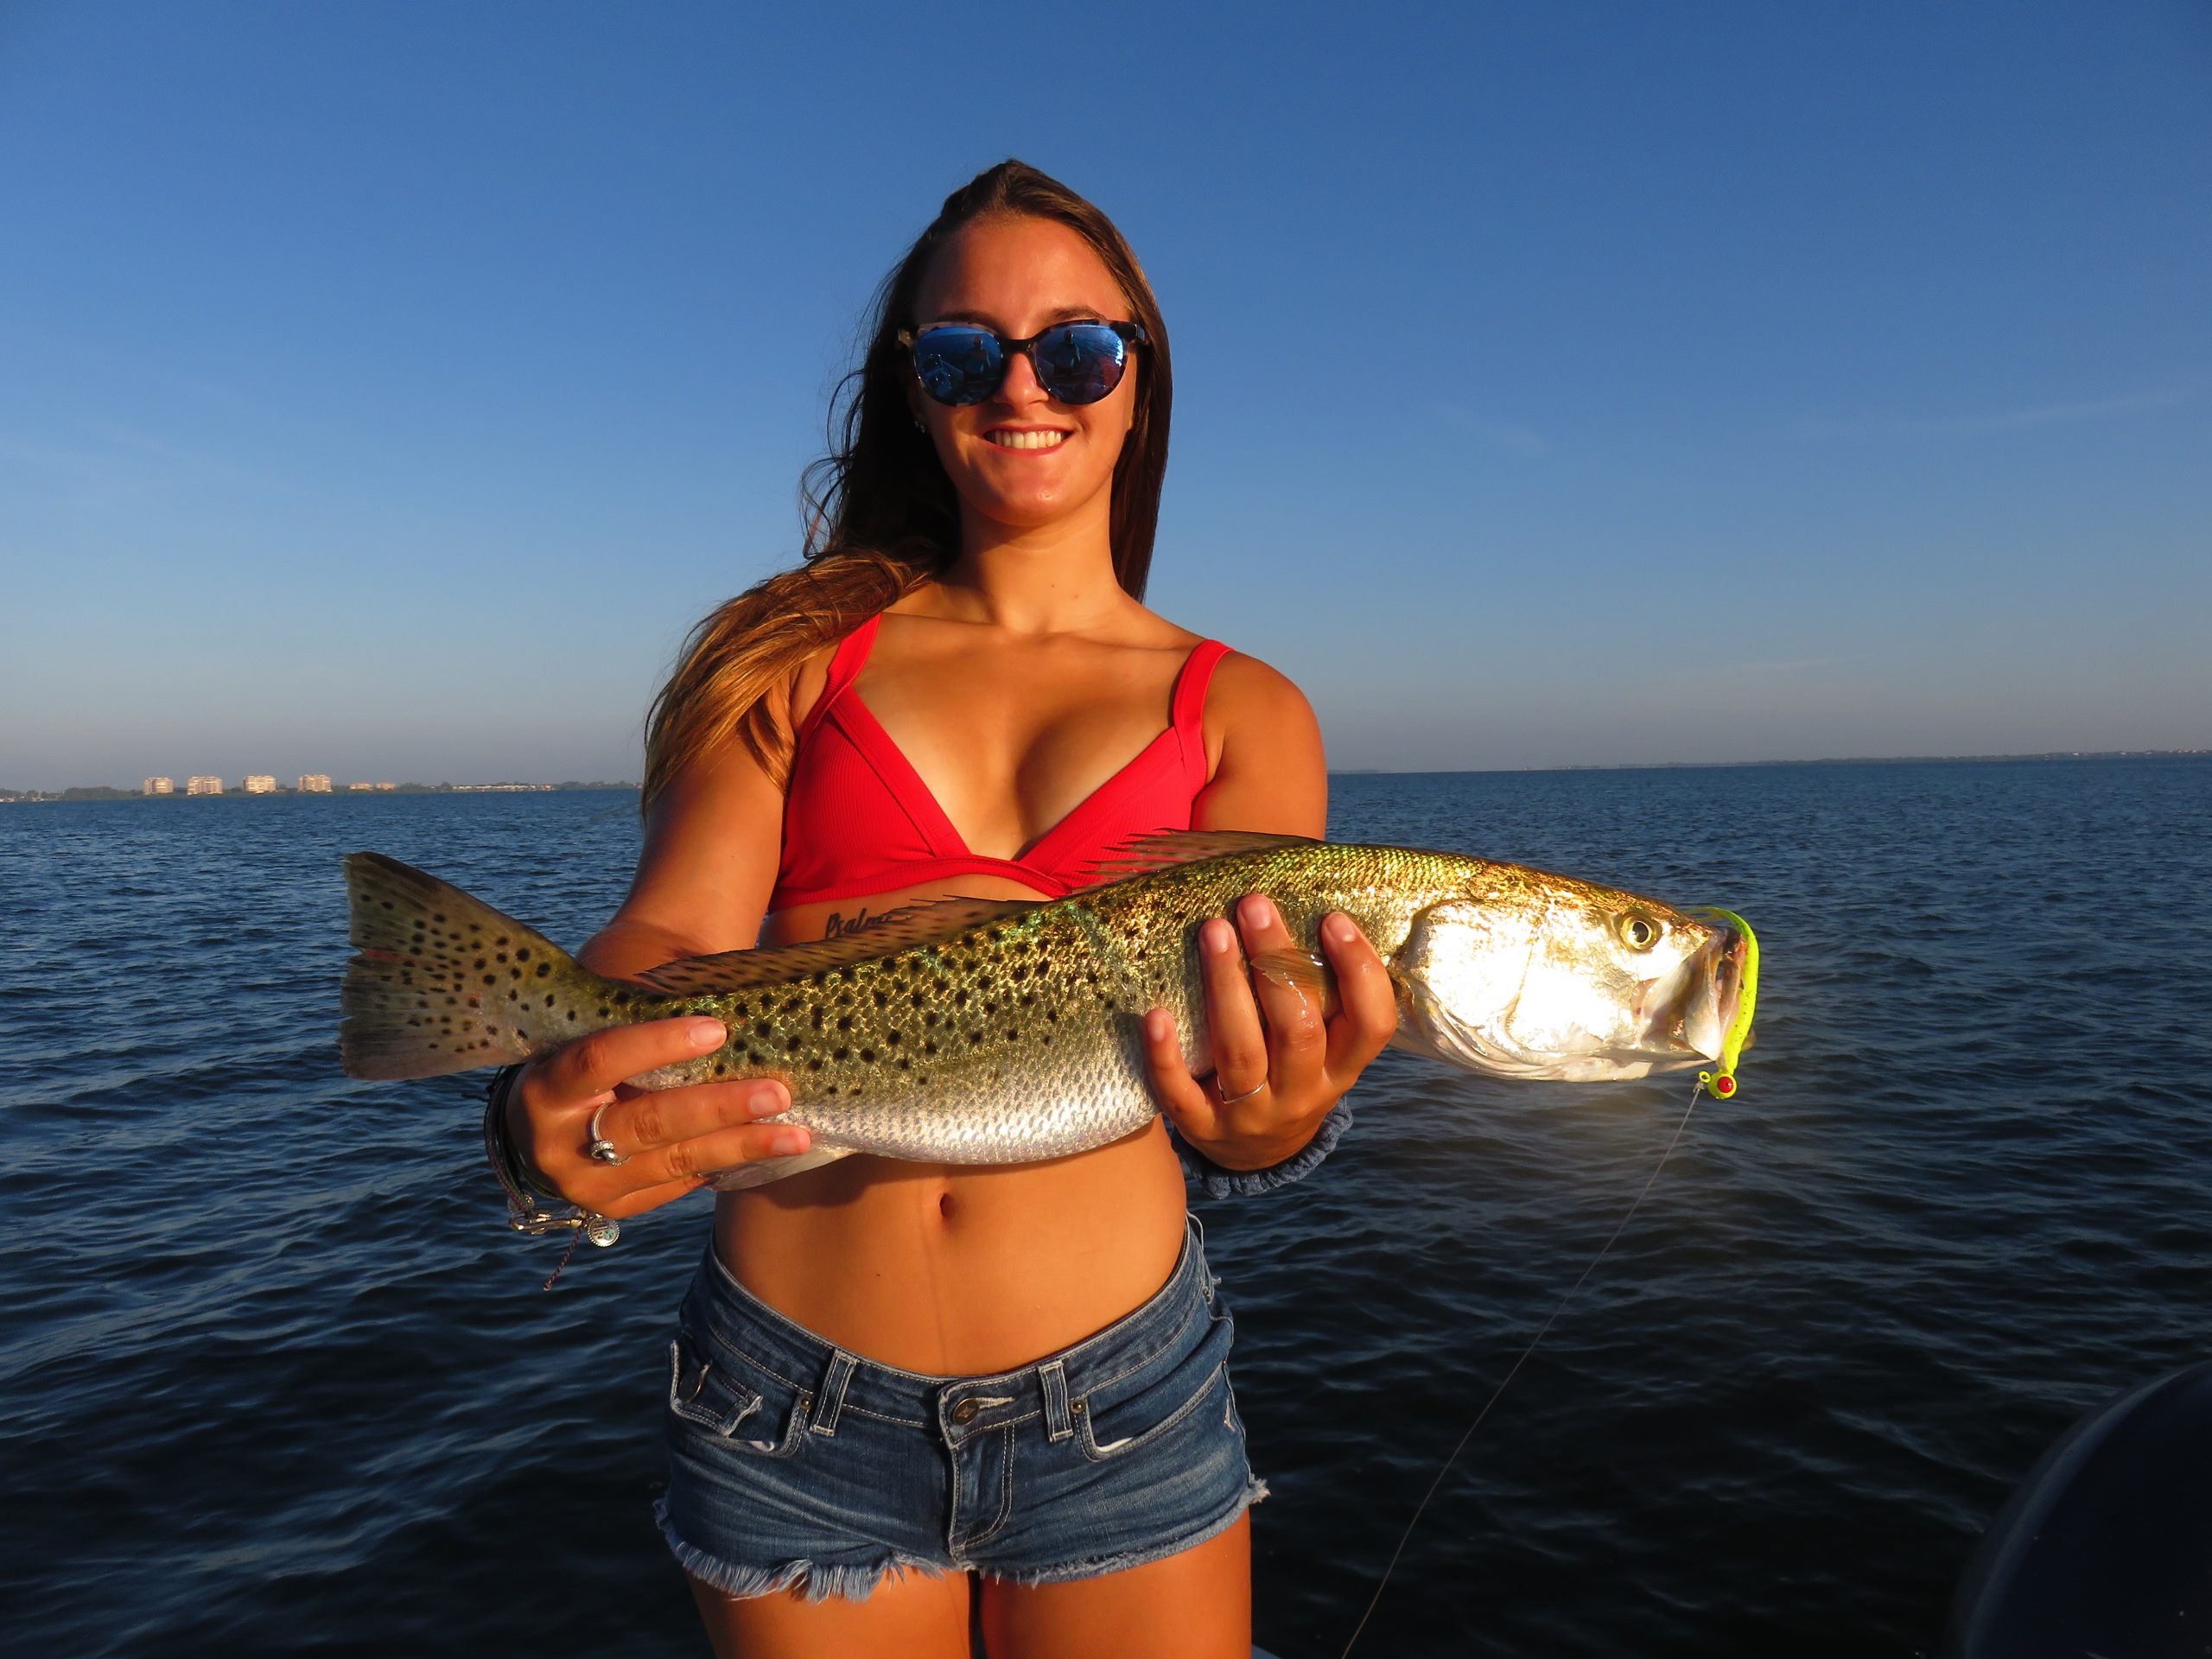 The Most EFFECTIVE Lures & Rigs to Catch GIANT Speckled Trout